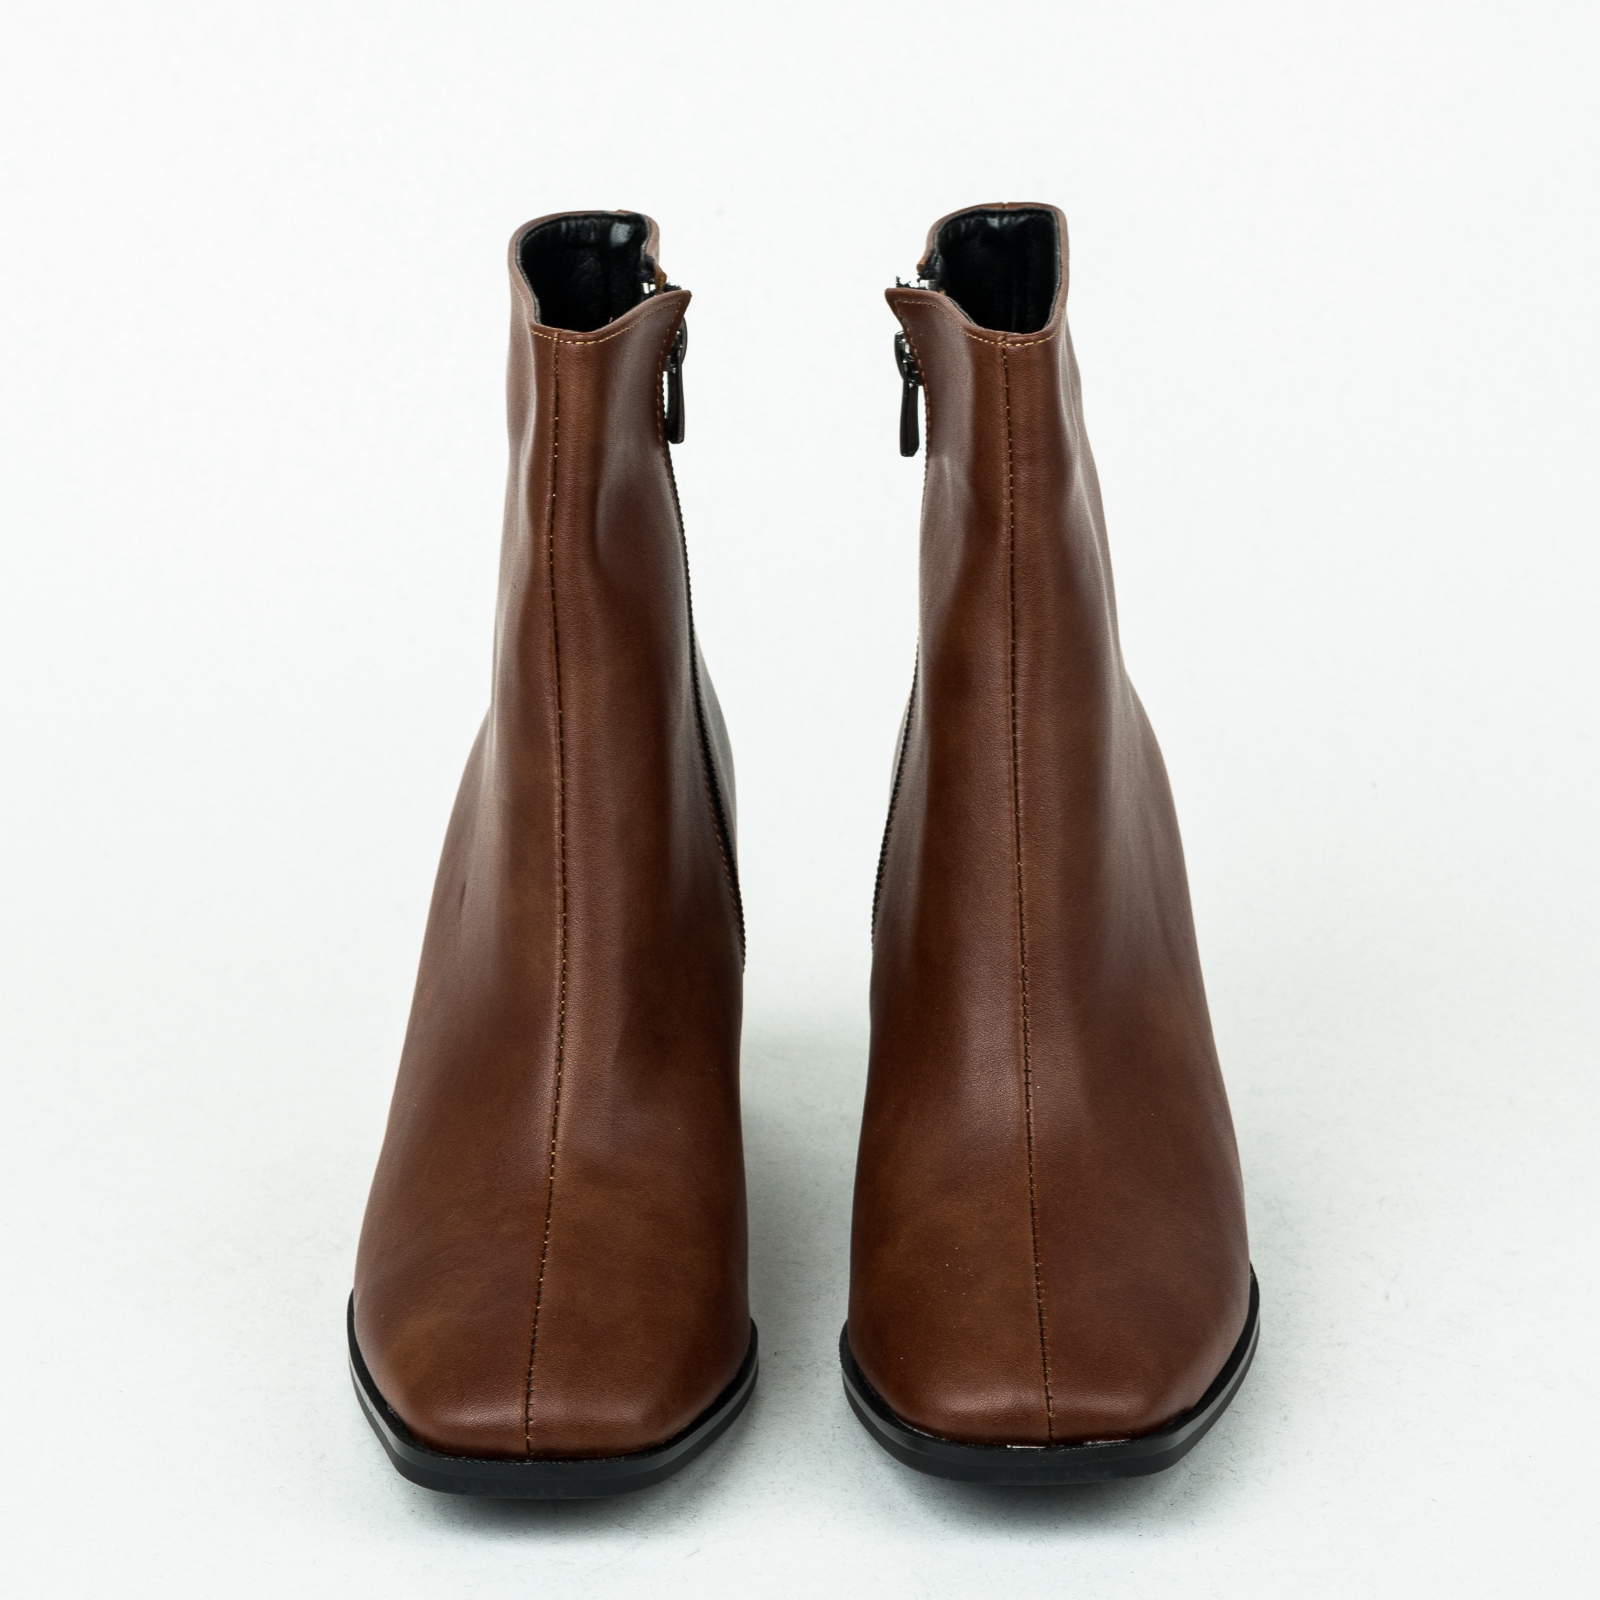 Women ankle boots B279 - CAMEL